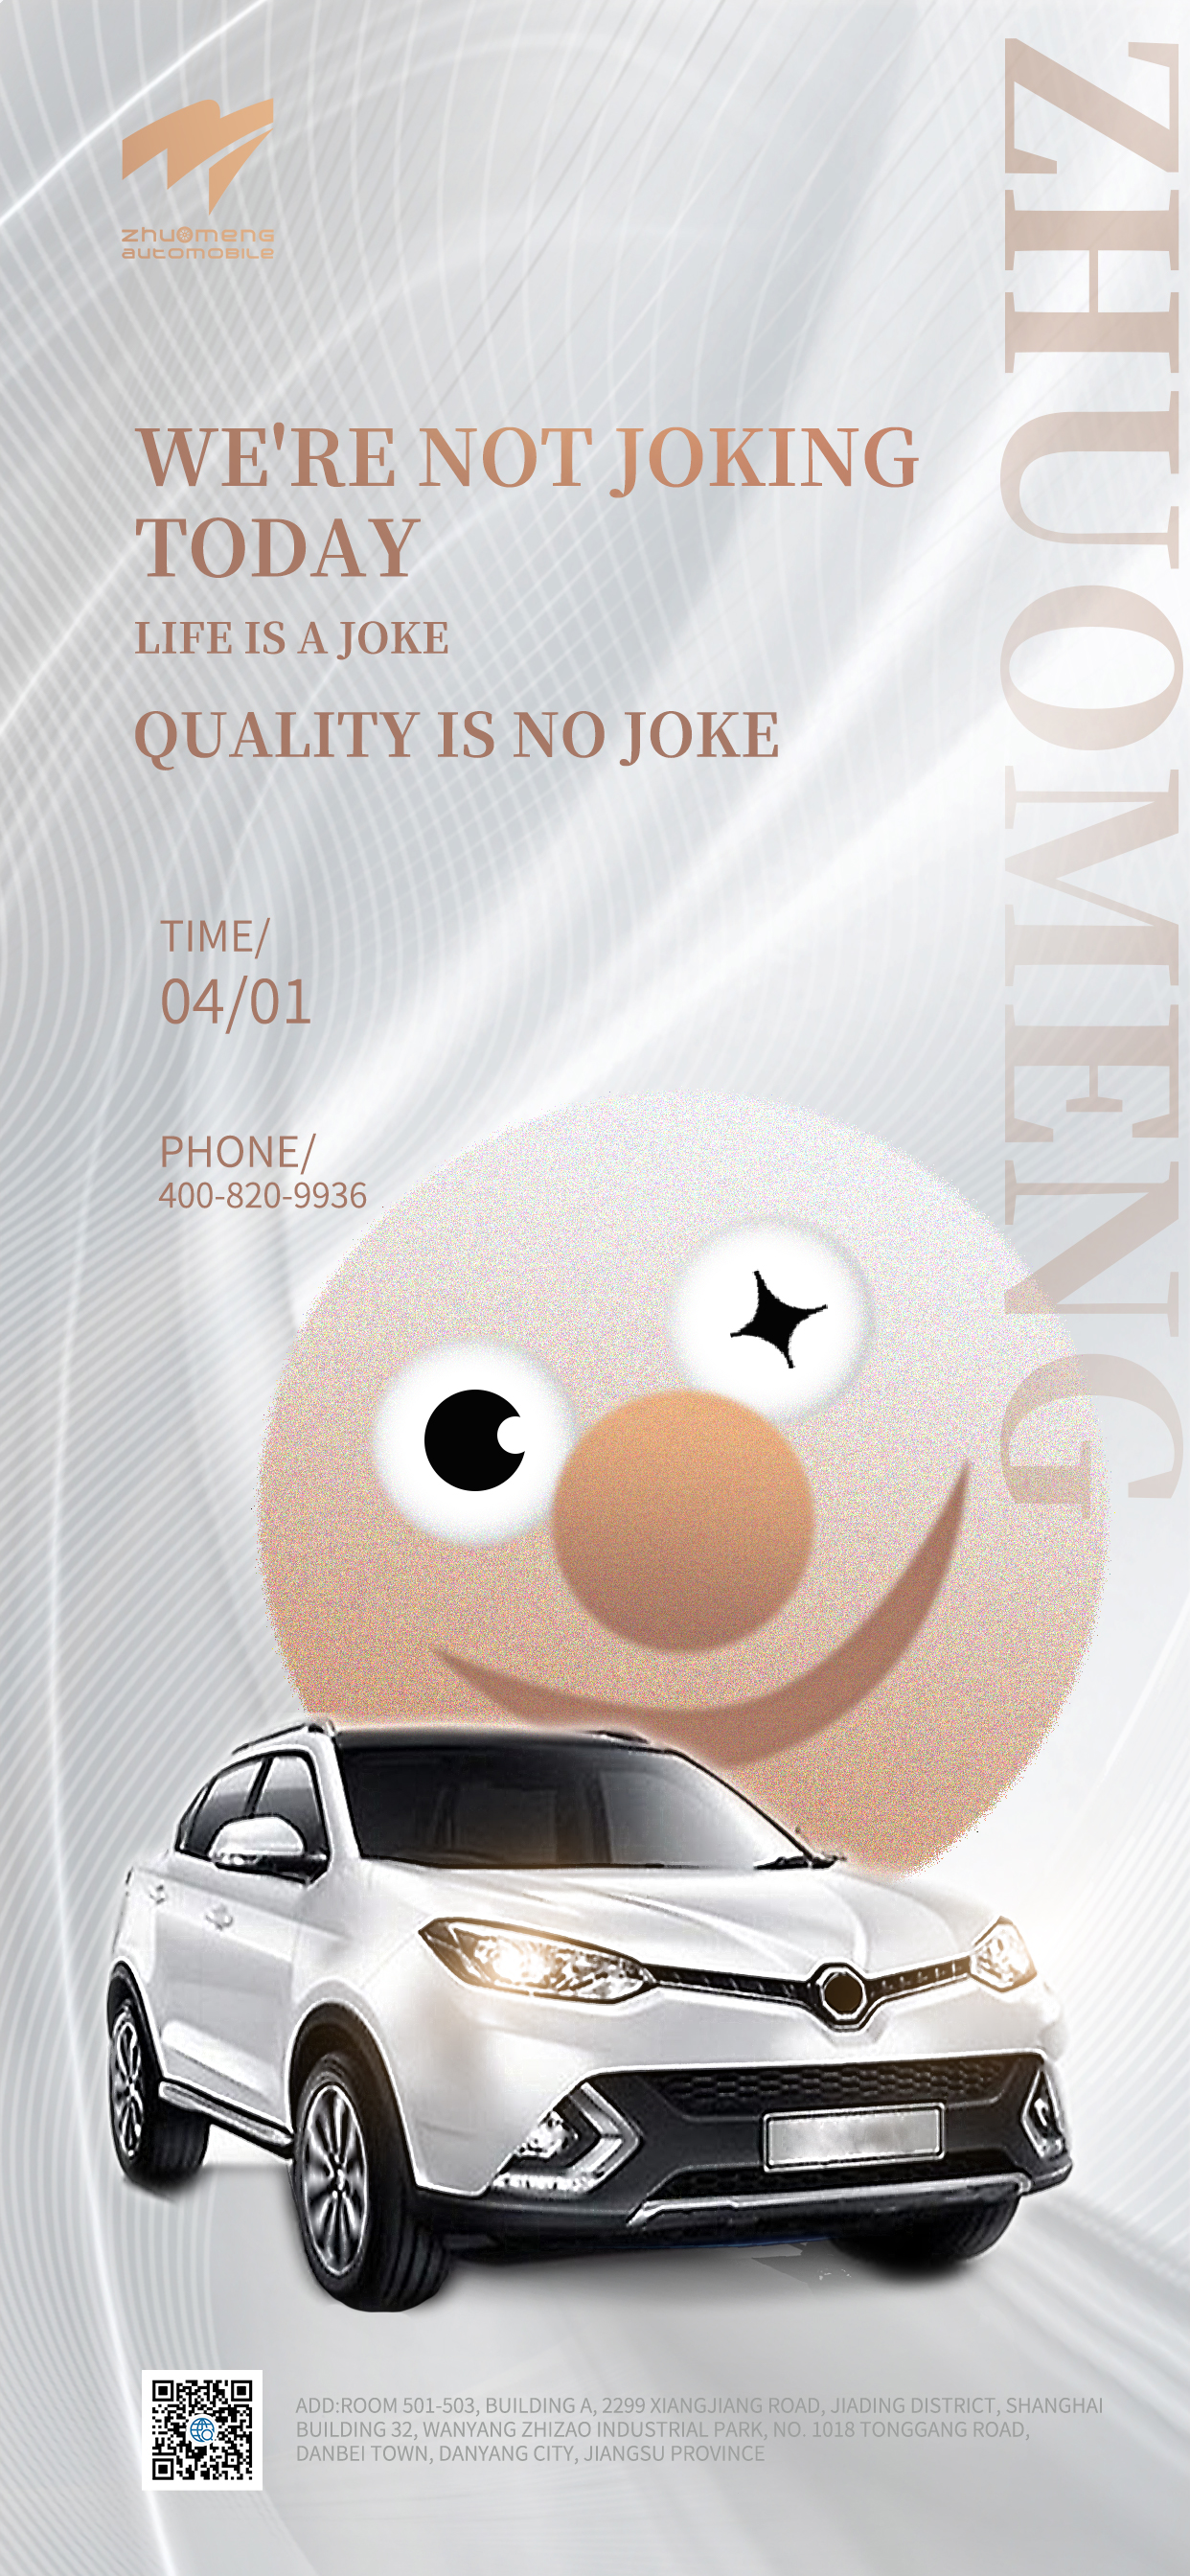 Zhuomeng (Shanghai) Automobile Co., LTD. April Fool’s Day